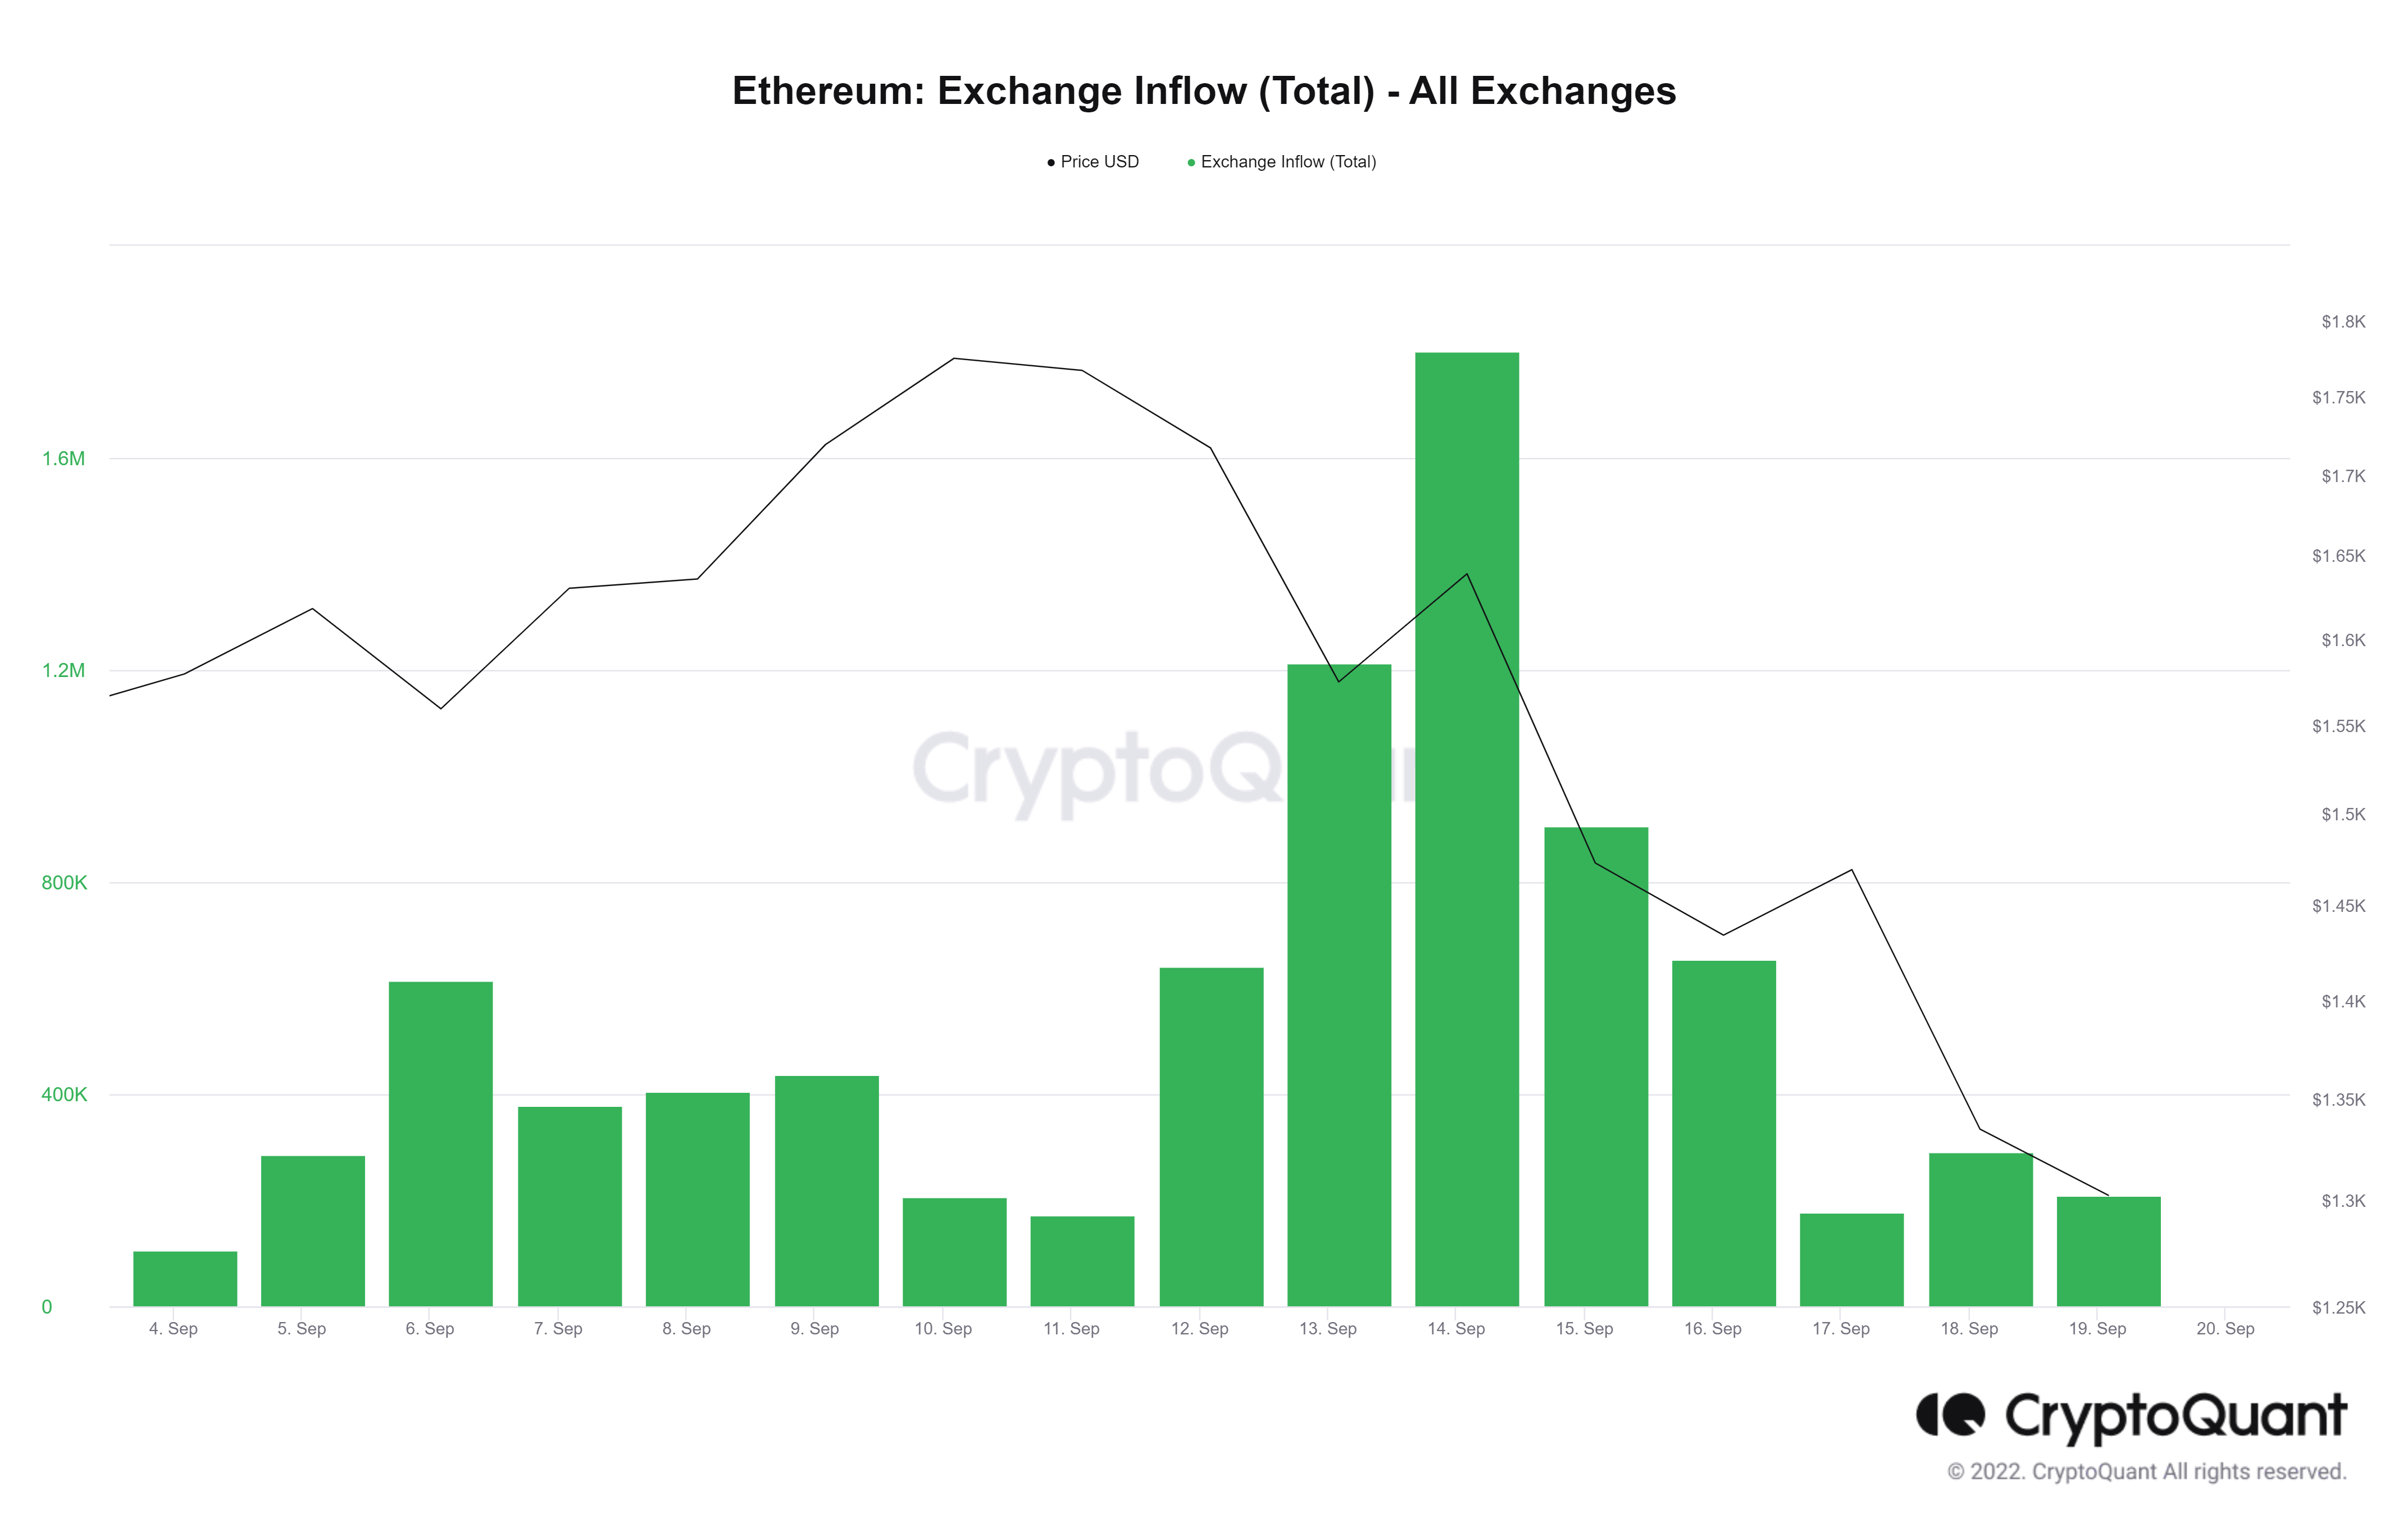 Ethereum Exchange Inflow (Total) - All Exchanges ETH